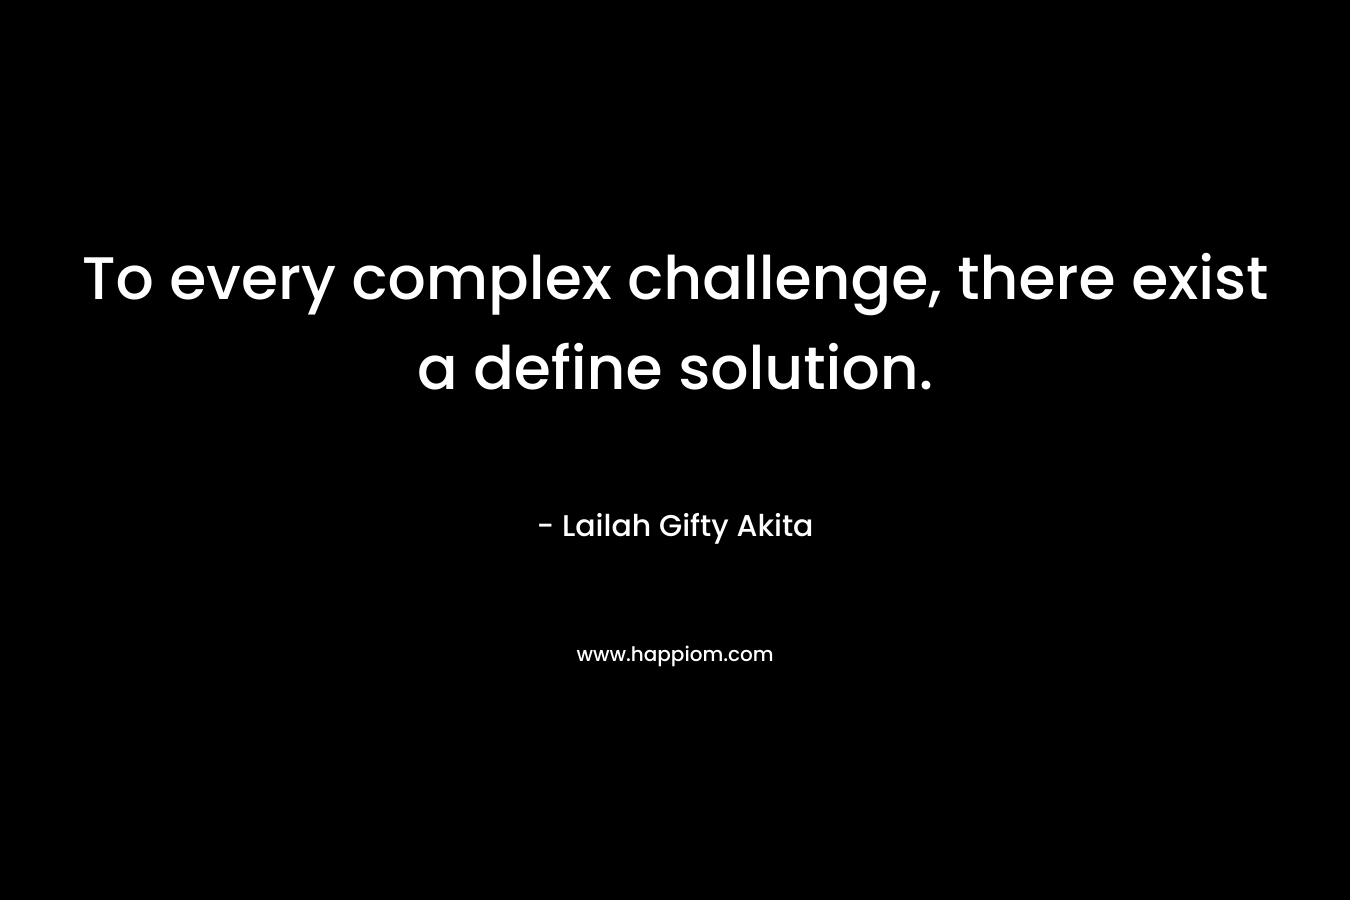 To every complex challenge, there exist a define solution.